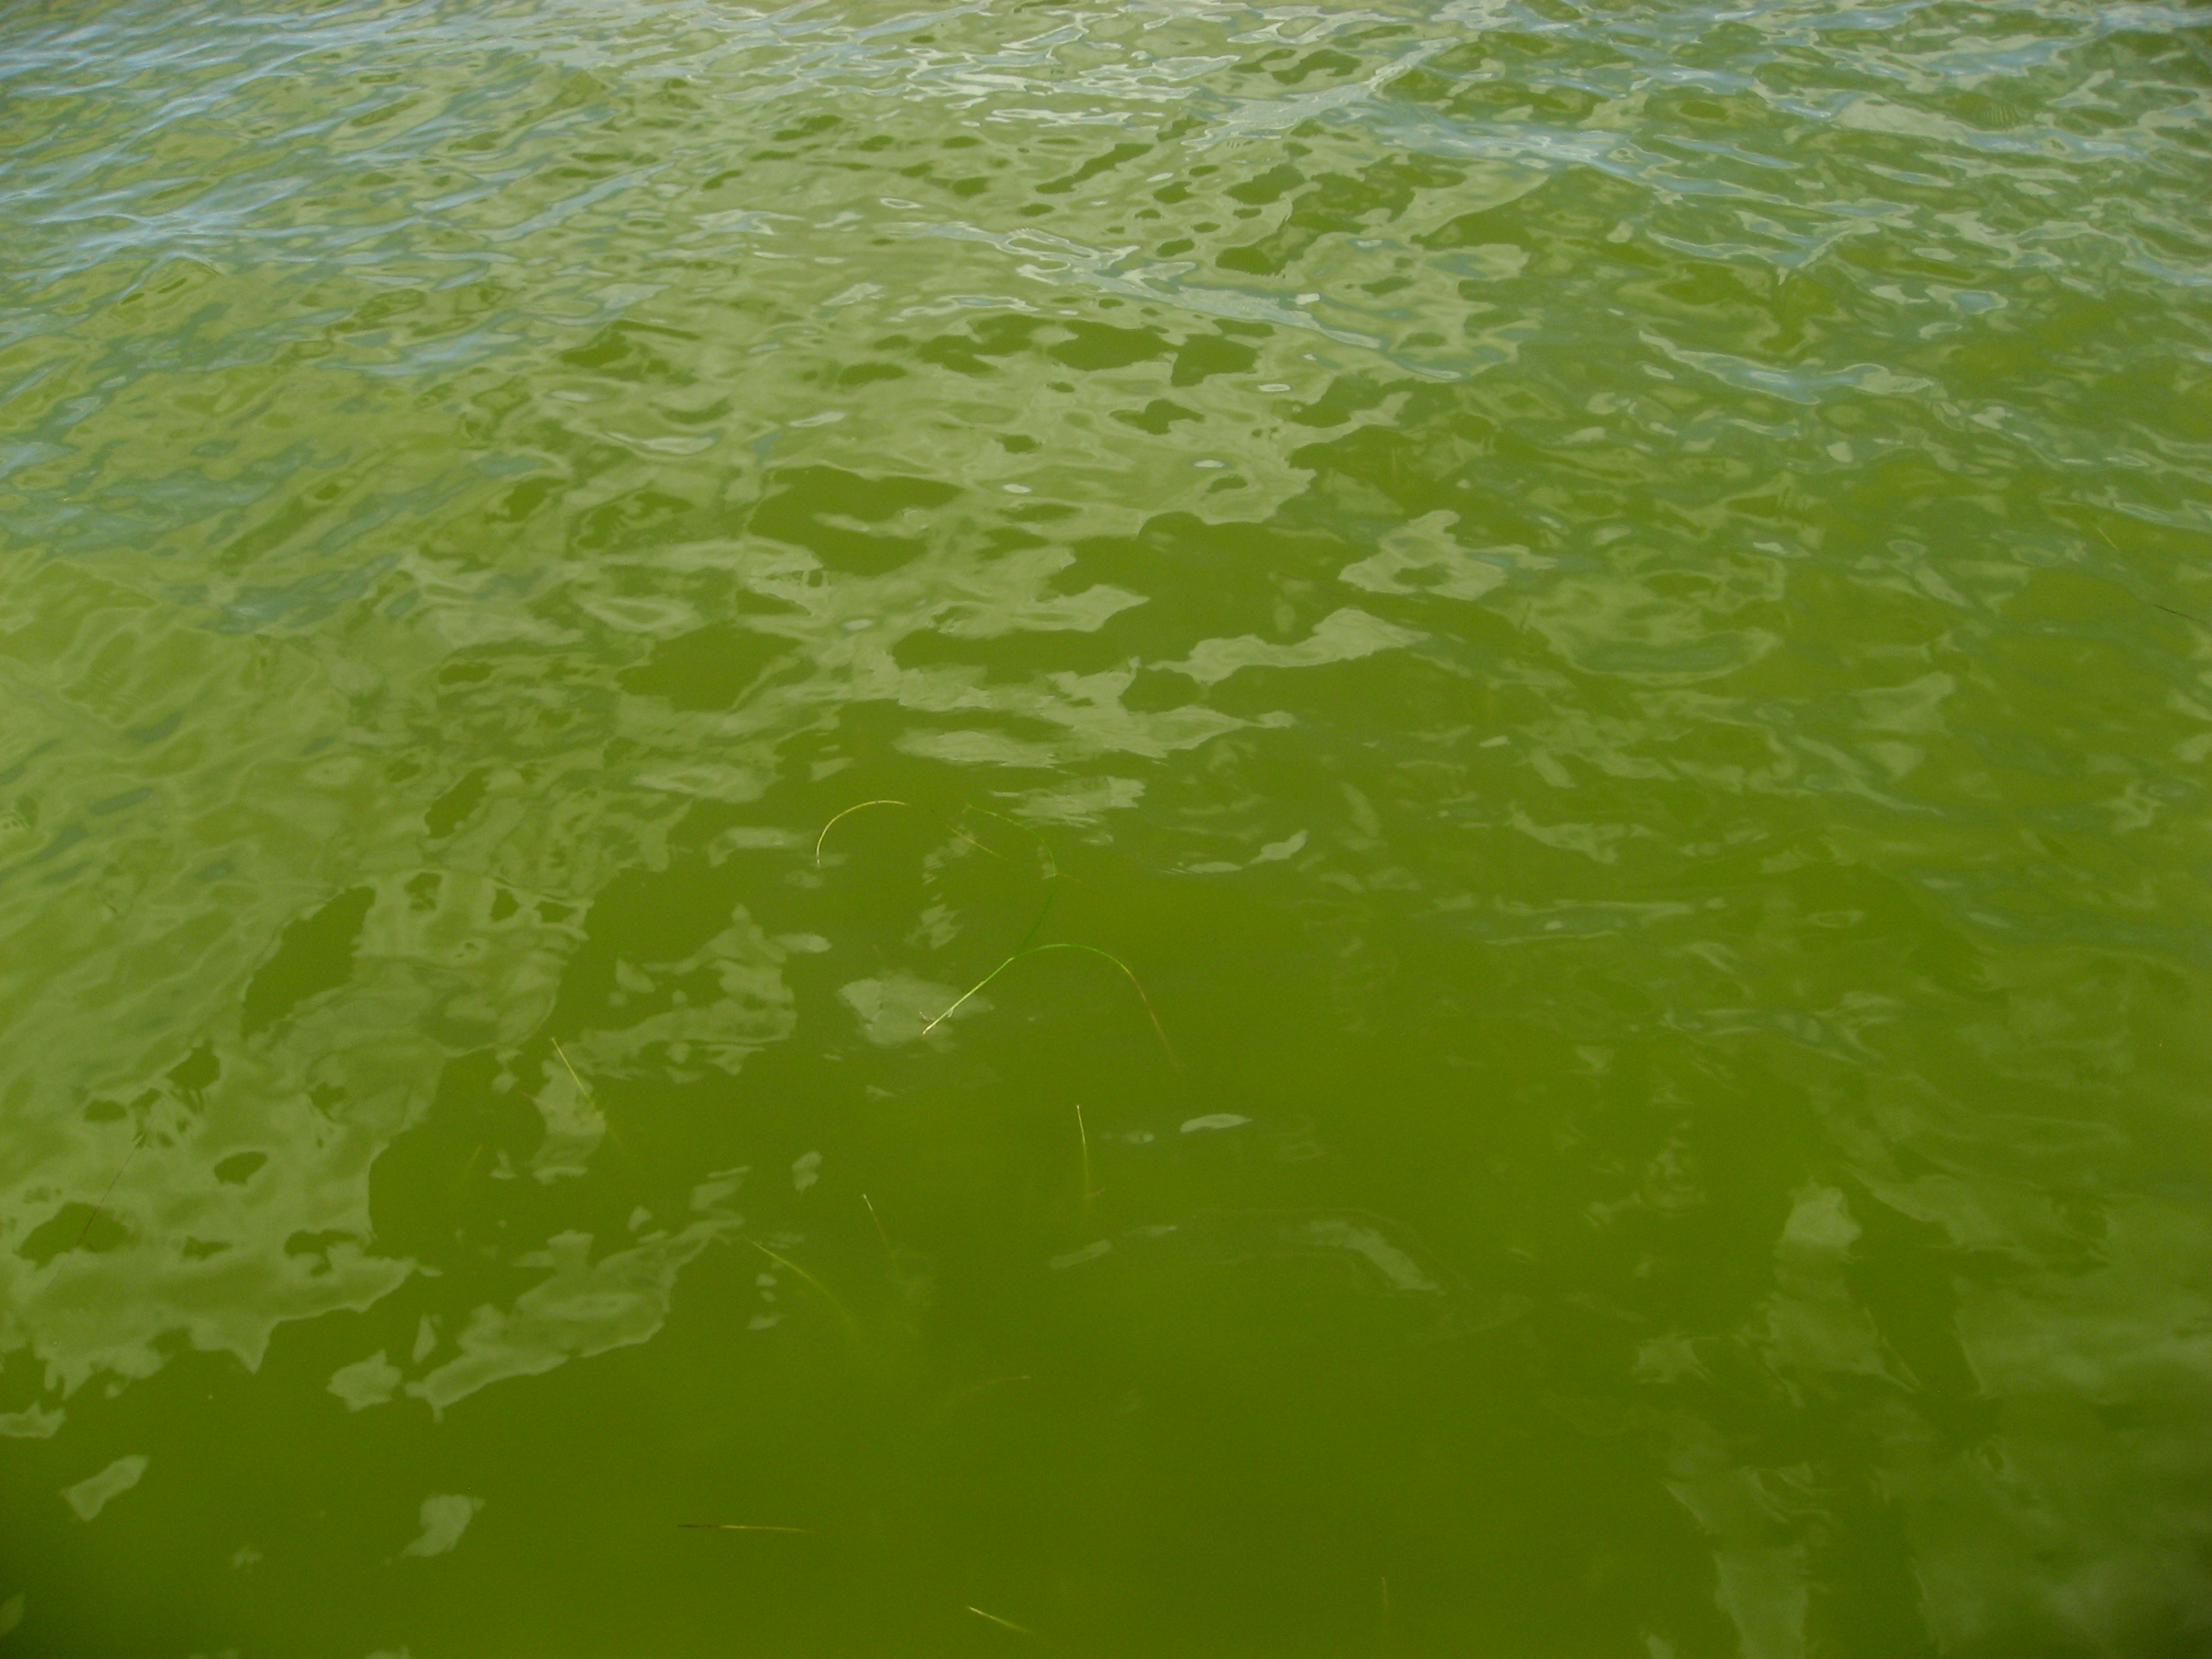 Discolored water in the Indian River Lagoon was caused by algae.